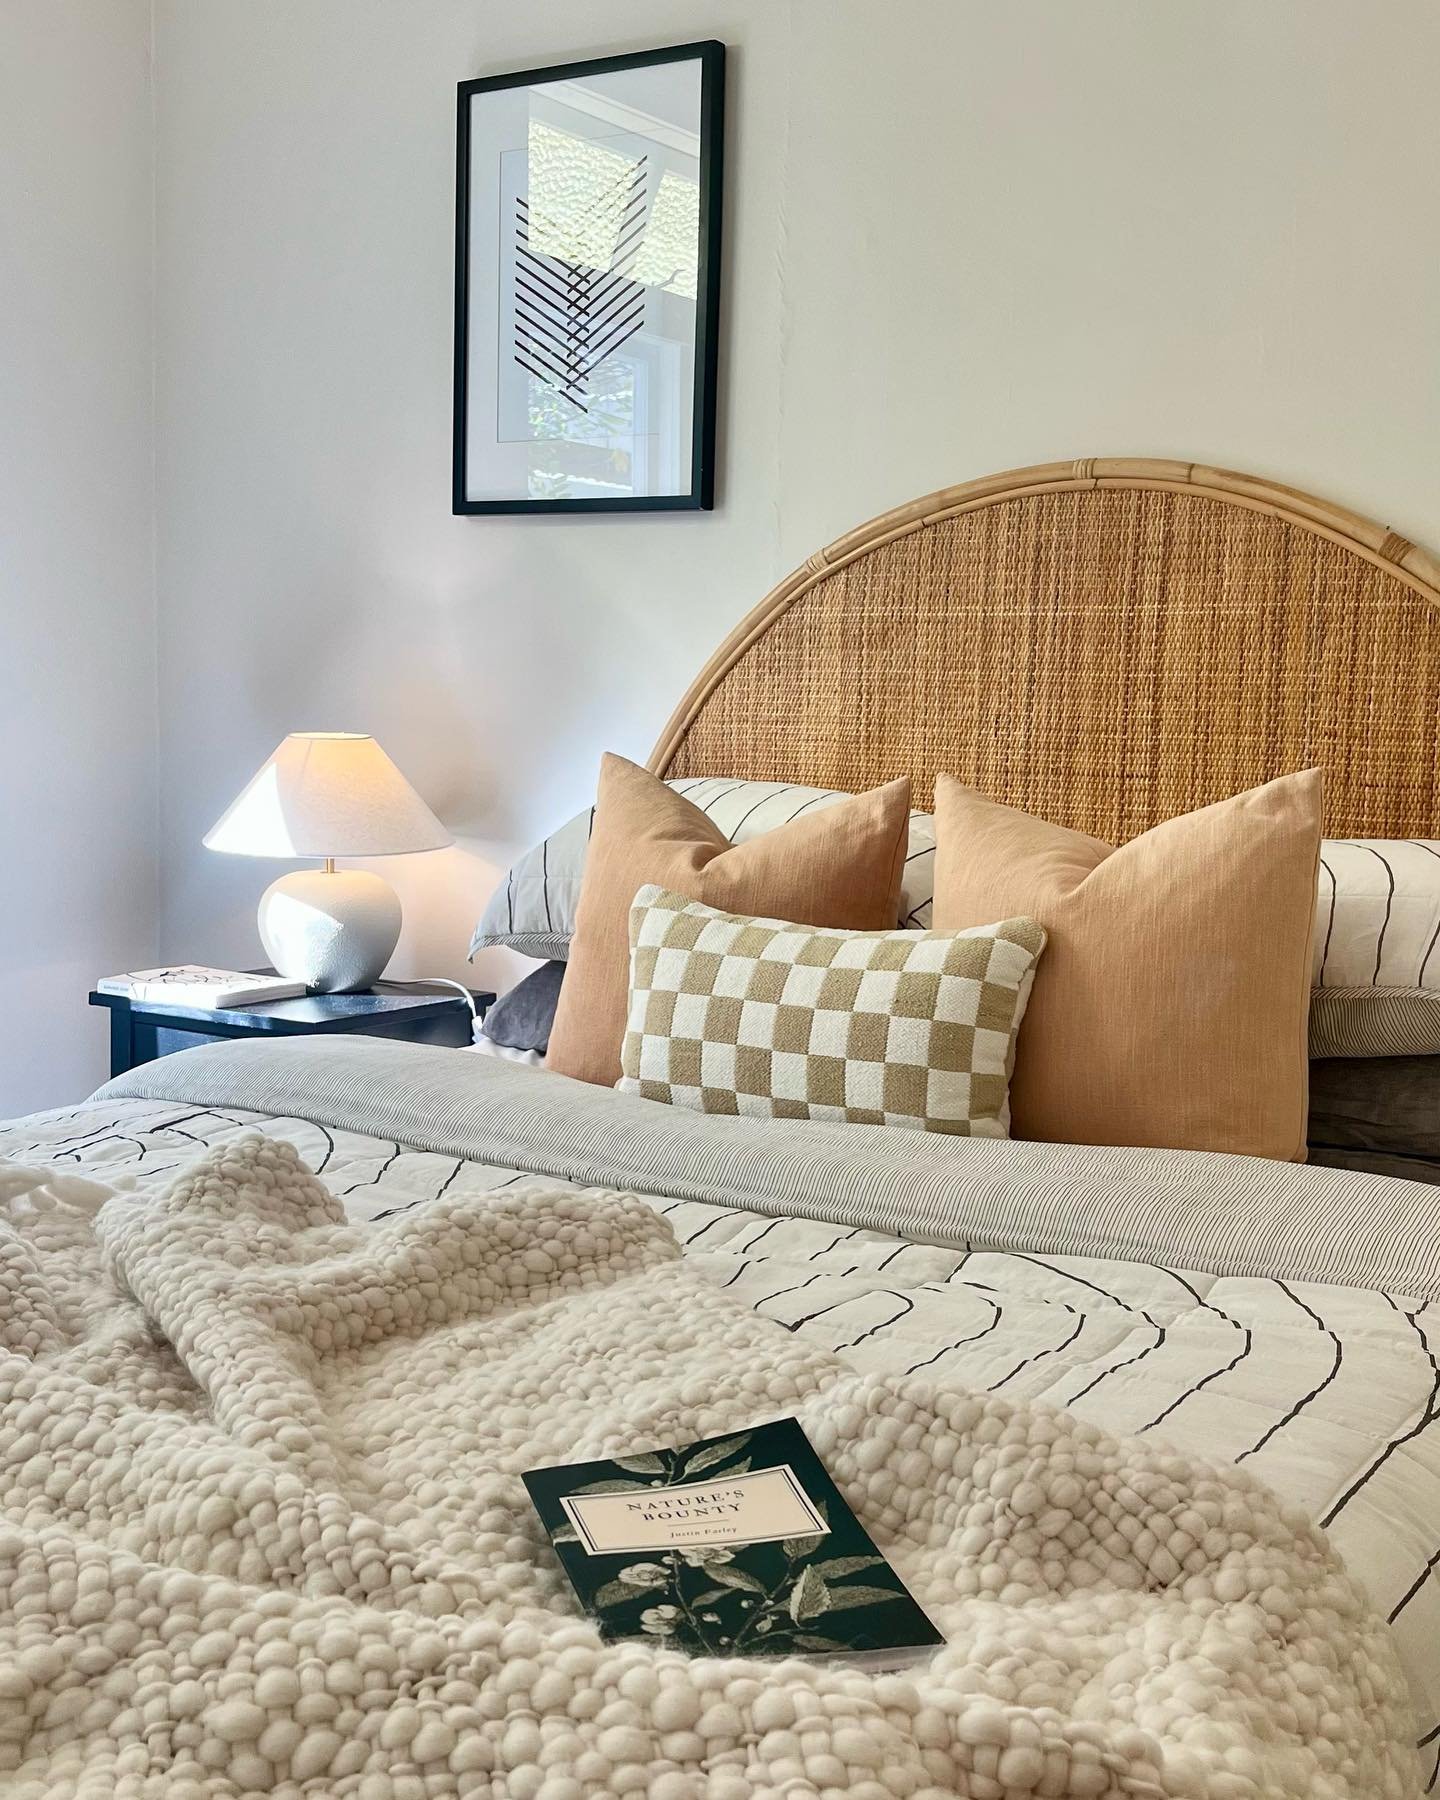 Cozy is a must this time of year, right?!?
.
.
#finer #finerhomes #finerthings #finerthingsclub #homestaging #bedroomstyling #bed #bedroomdecor #bedroominspo #bedtime #bedroom #homestyling #aucklandhomestaging #aucklandrealestate